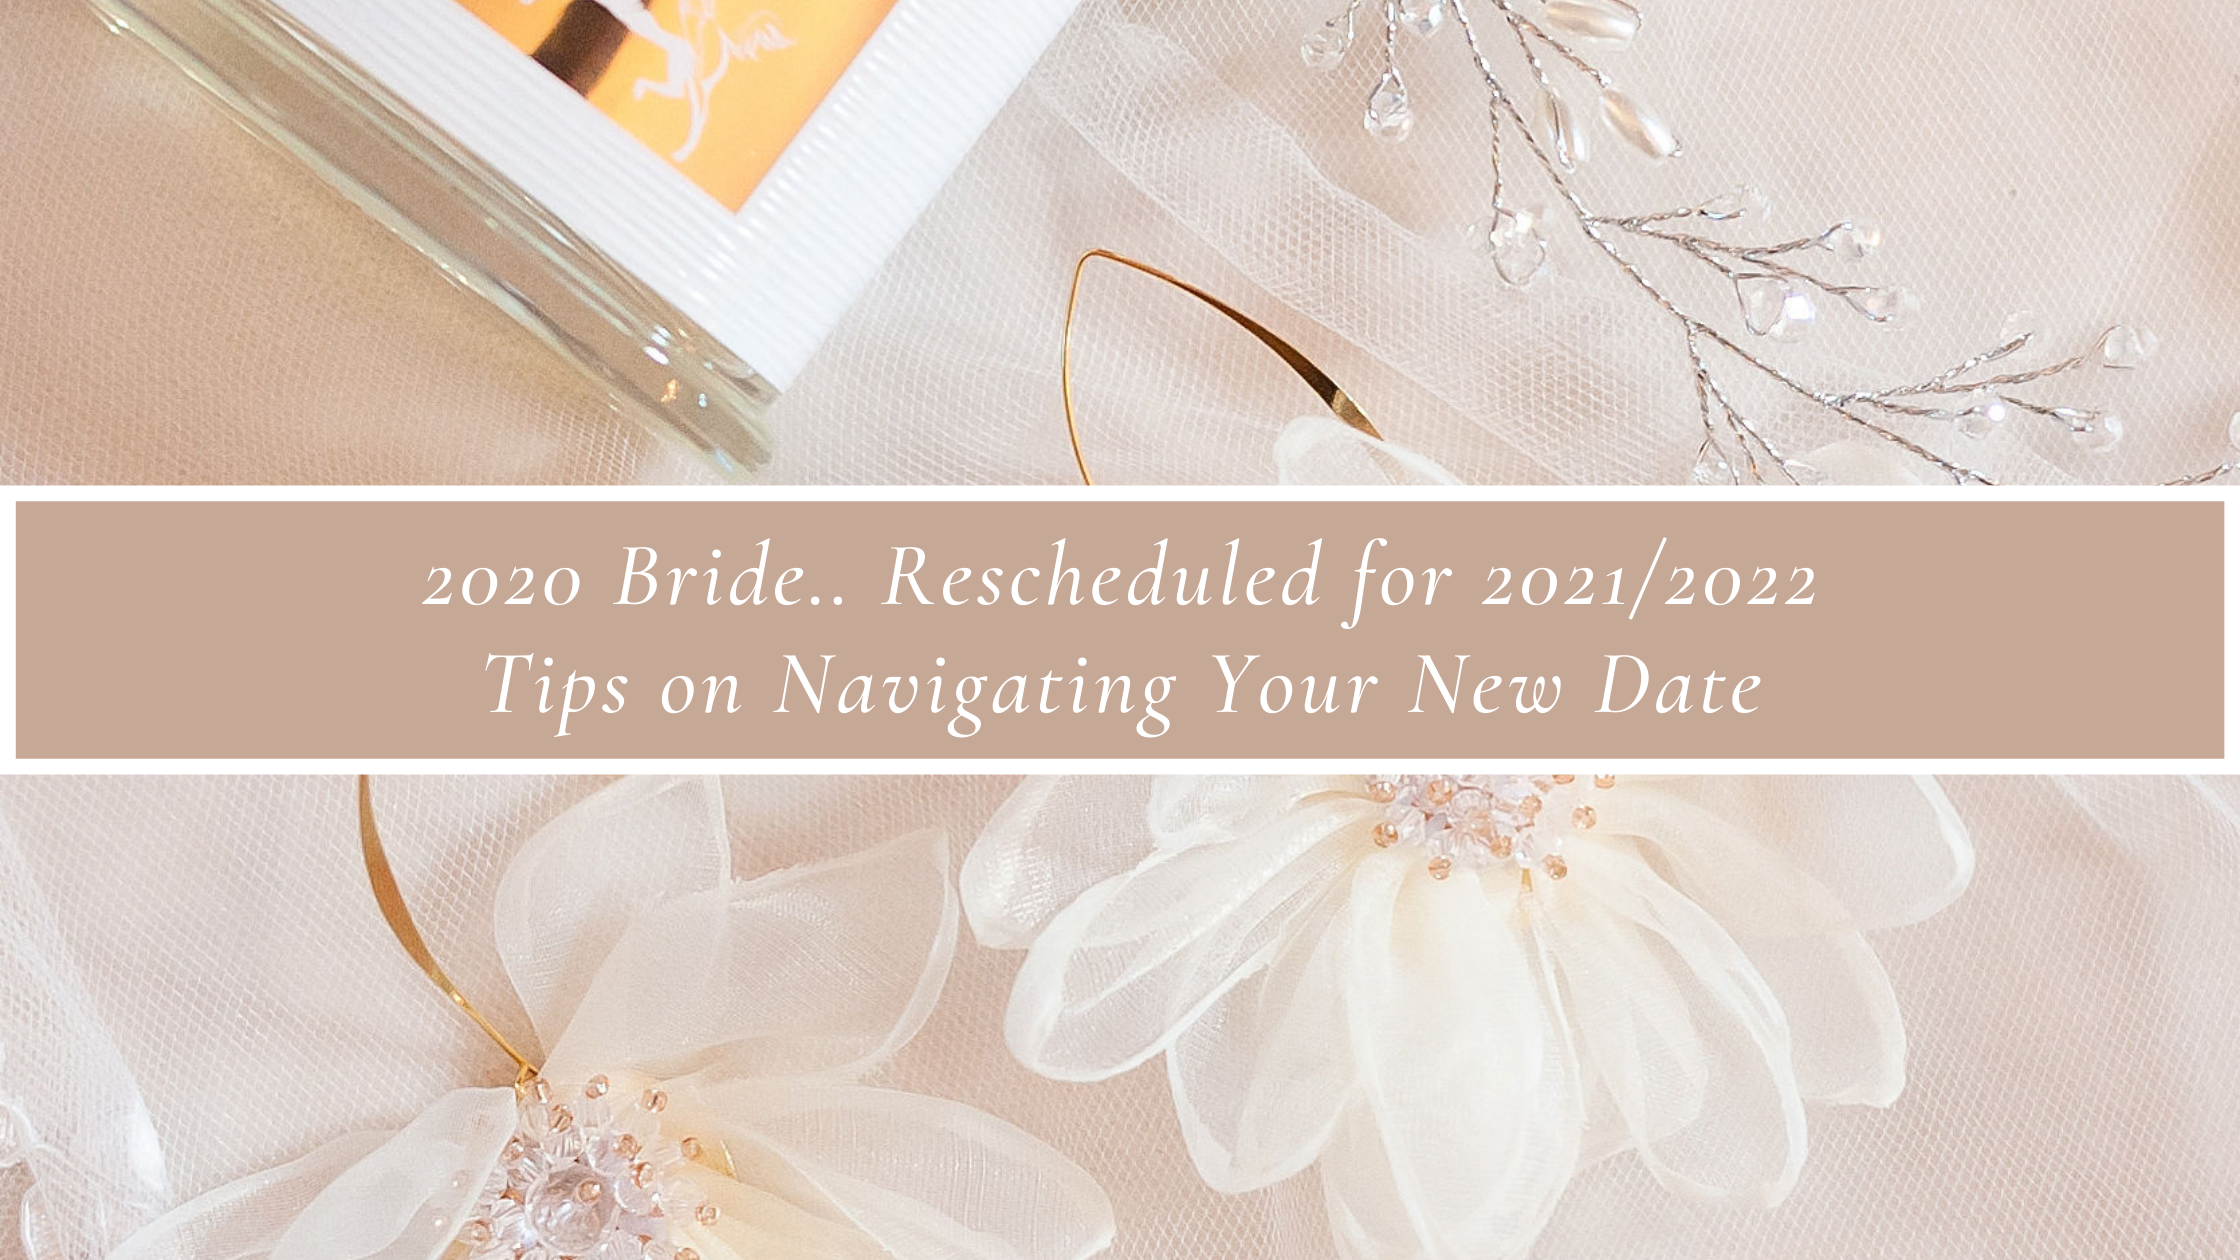 2020 Bride.. Rescheduled for 2021/2022 – Tips on Navigating Your New Date